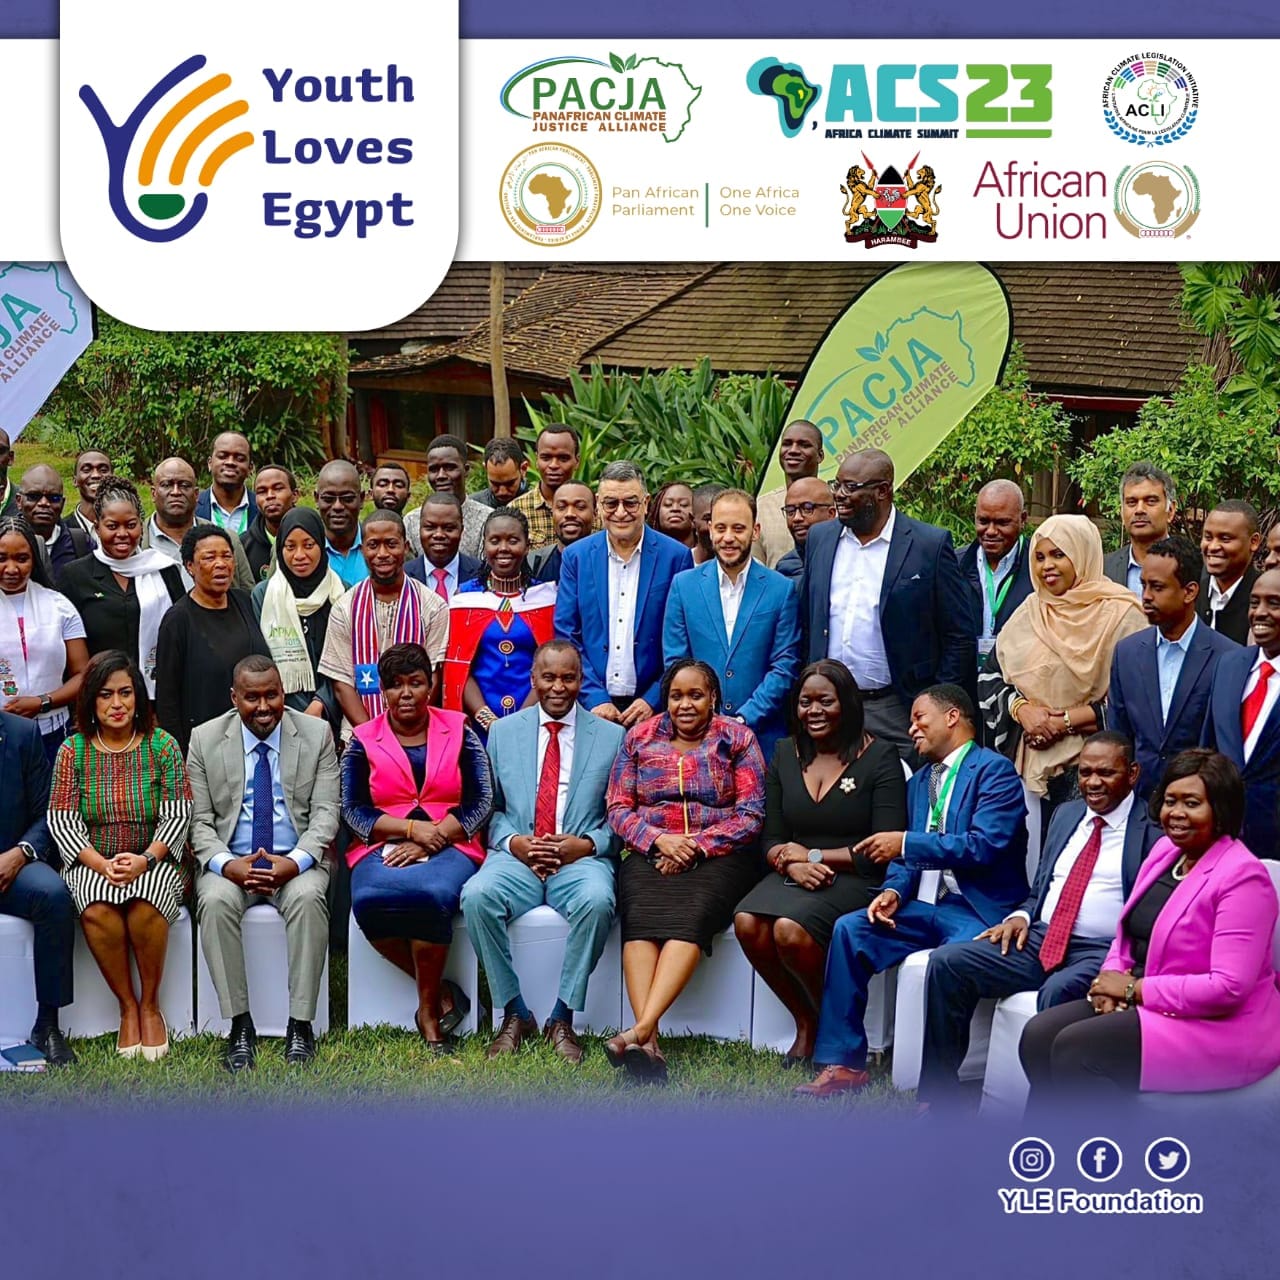 Youth loves Egypt is attending AFRICA CLIMATE summit